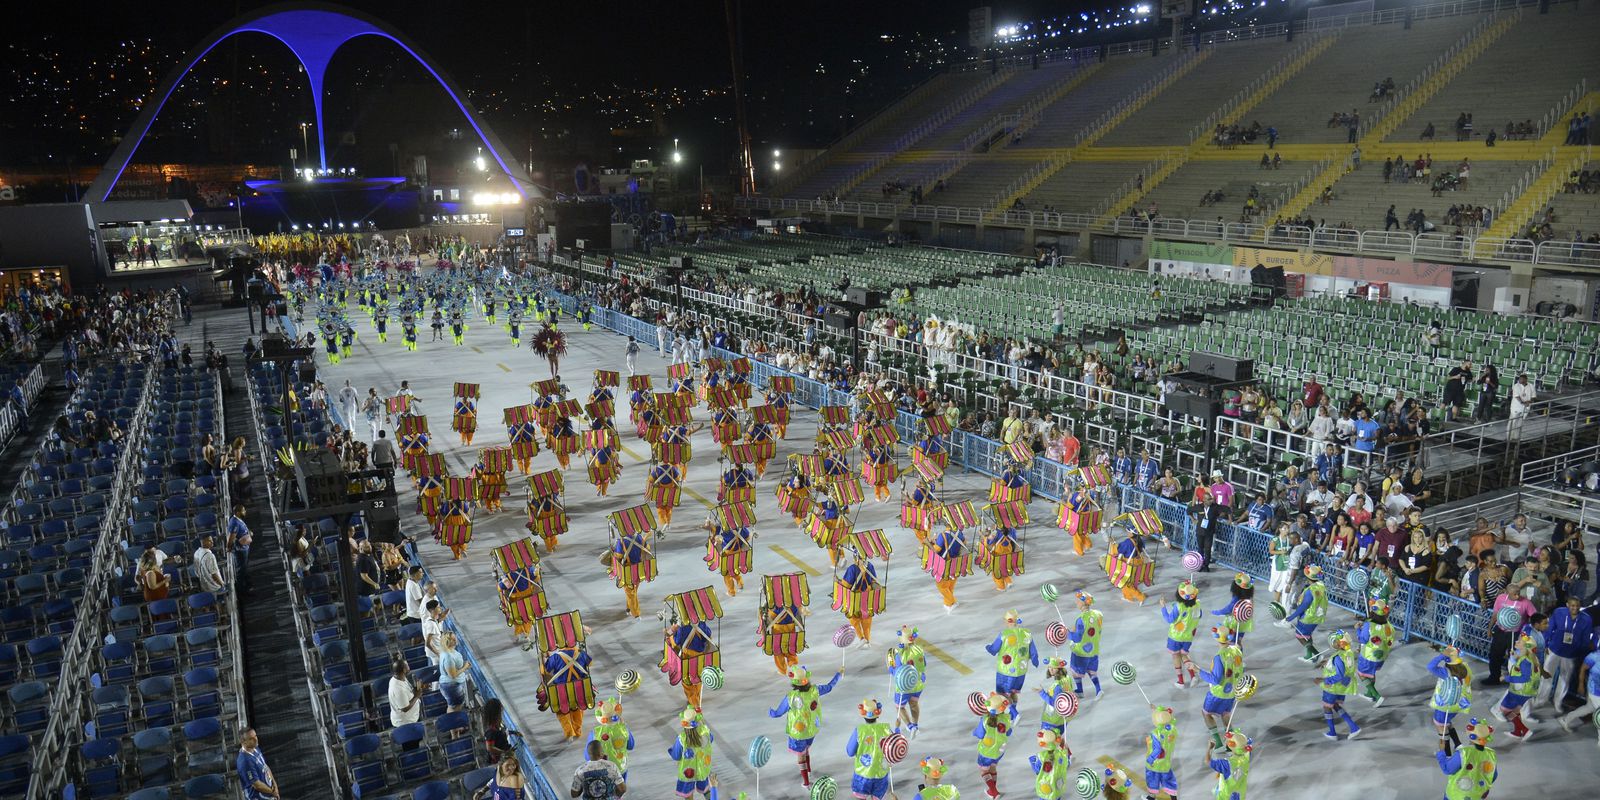 Rio: Carnival is reborn at the Sambadrome after two years of pandemic